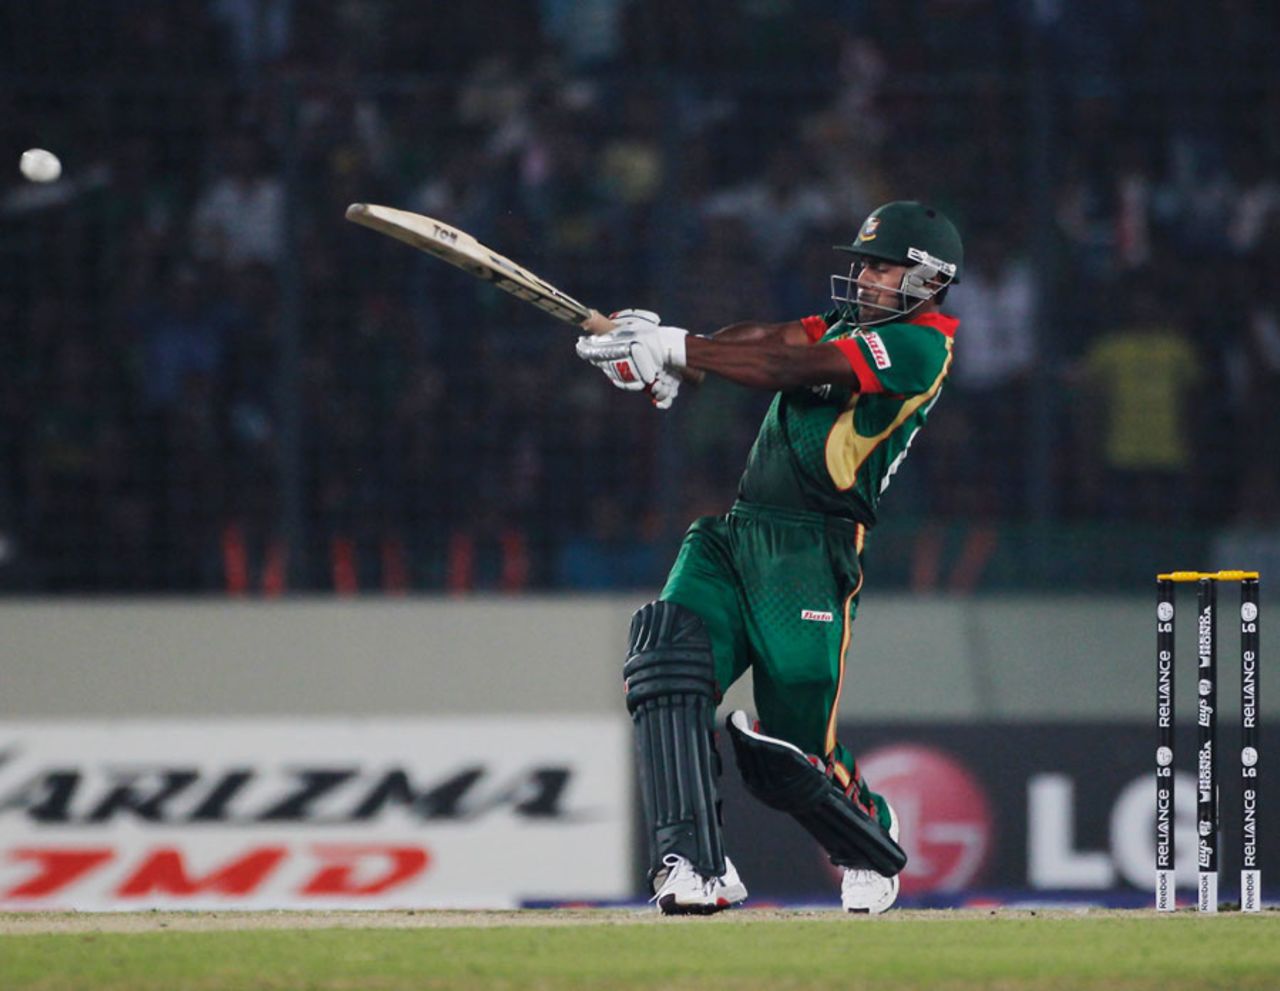 Imrul Kayes scored 34 off 29 balls before being bowled by Munaf Patel, Bangladesh v India, Group B, World Cup 2011, Mirpur, February 19, 2011